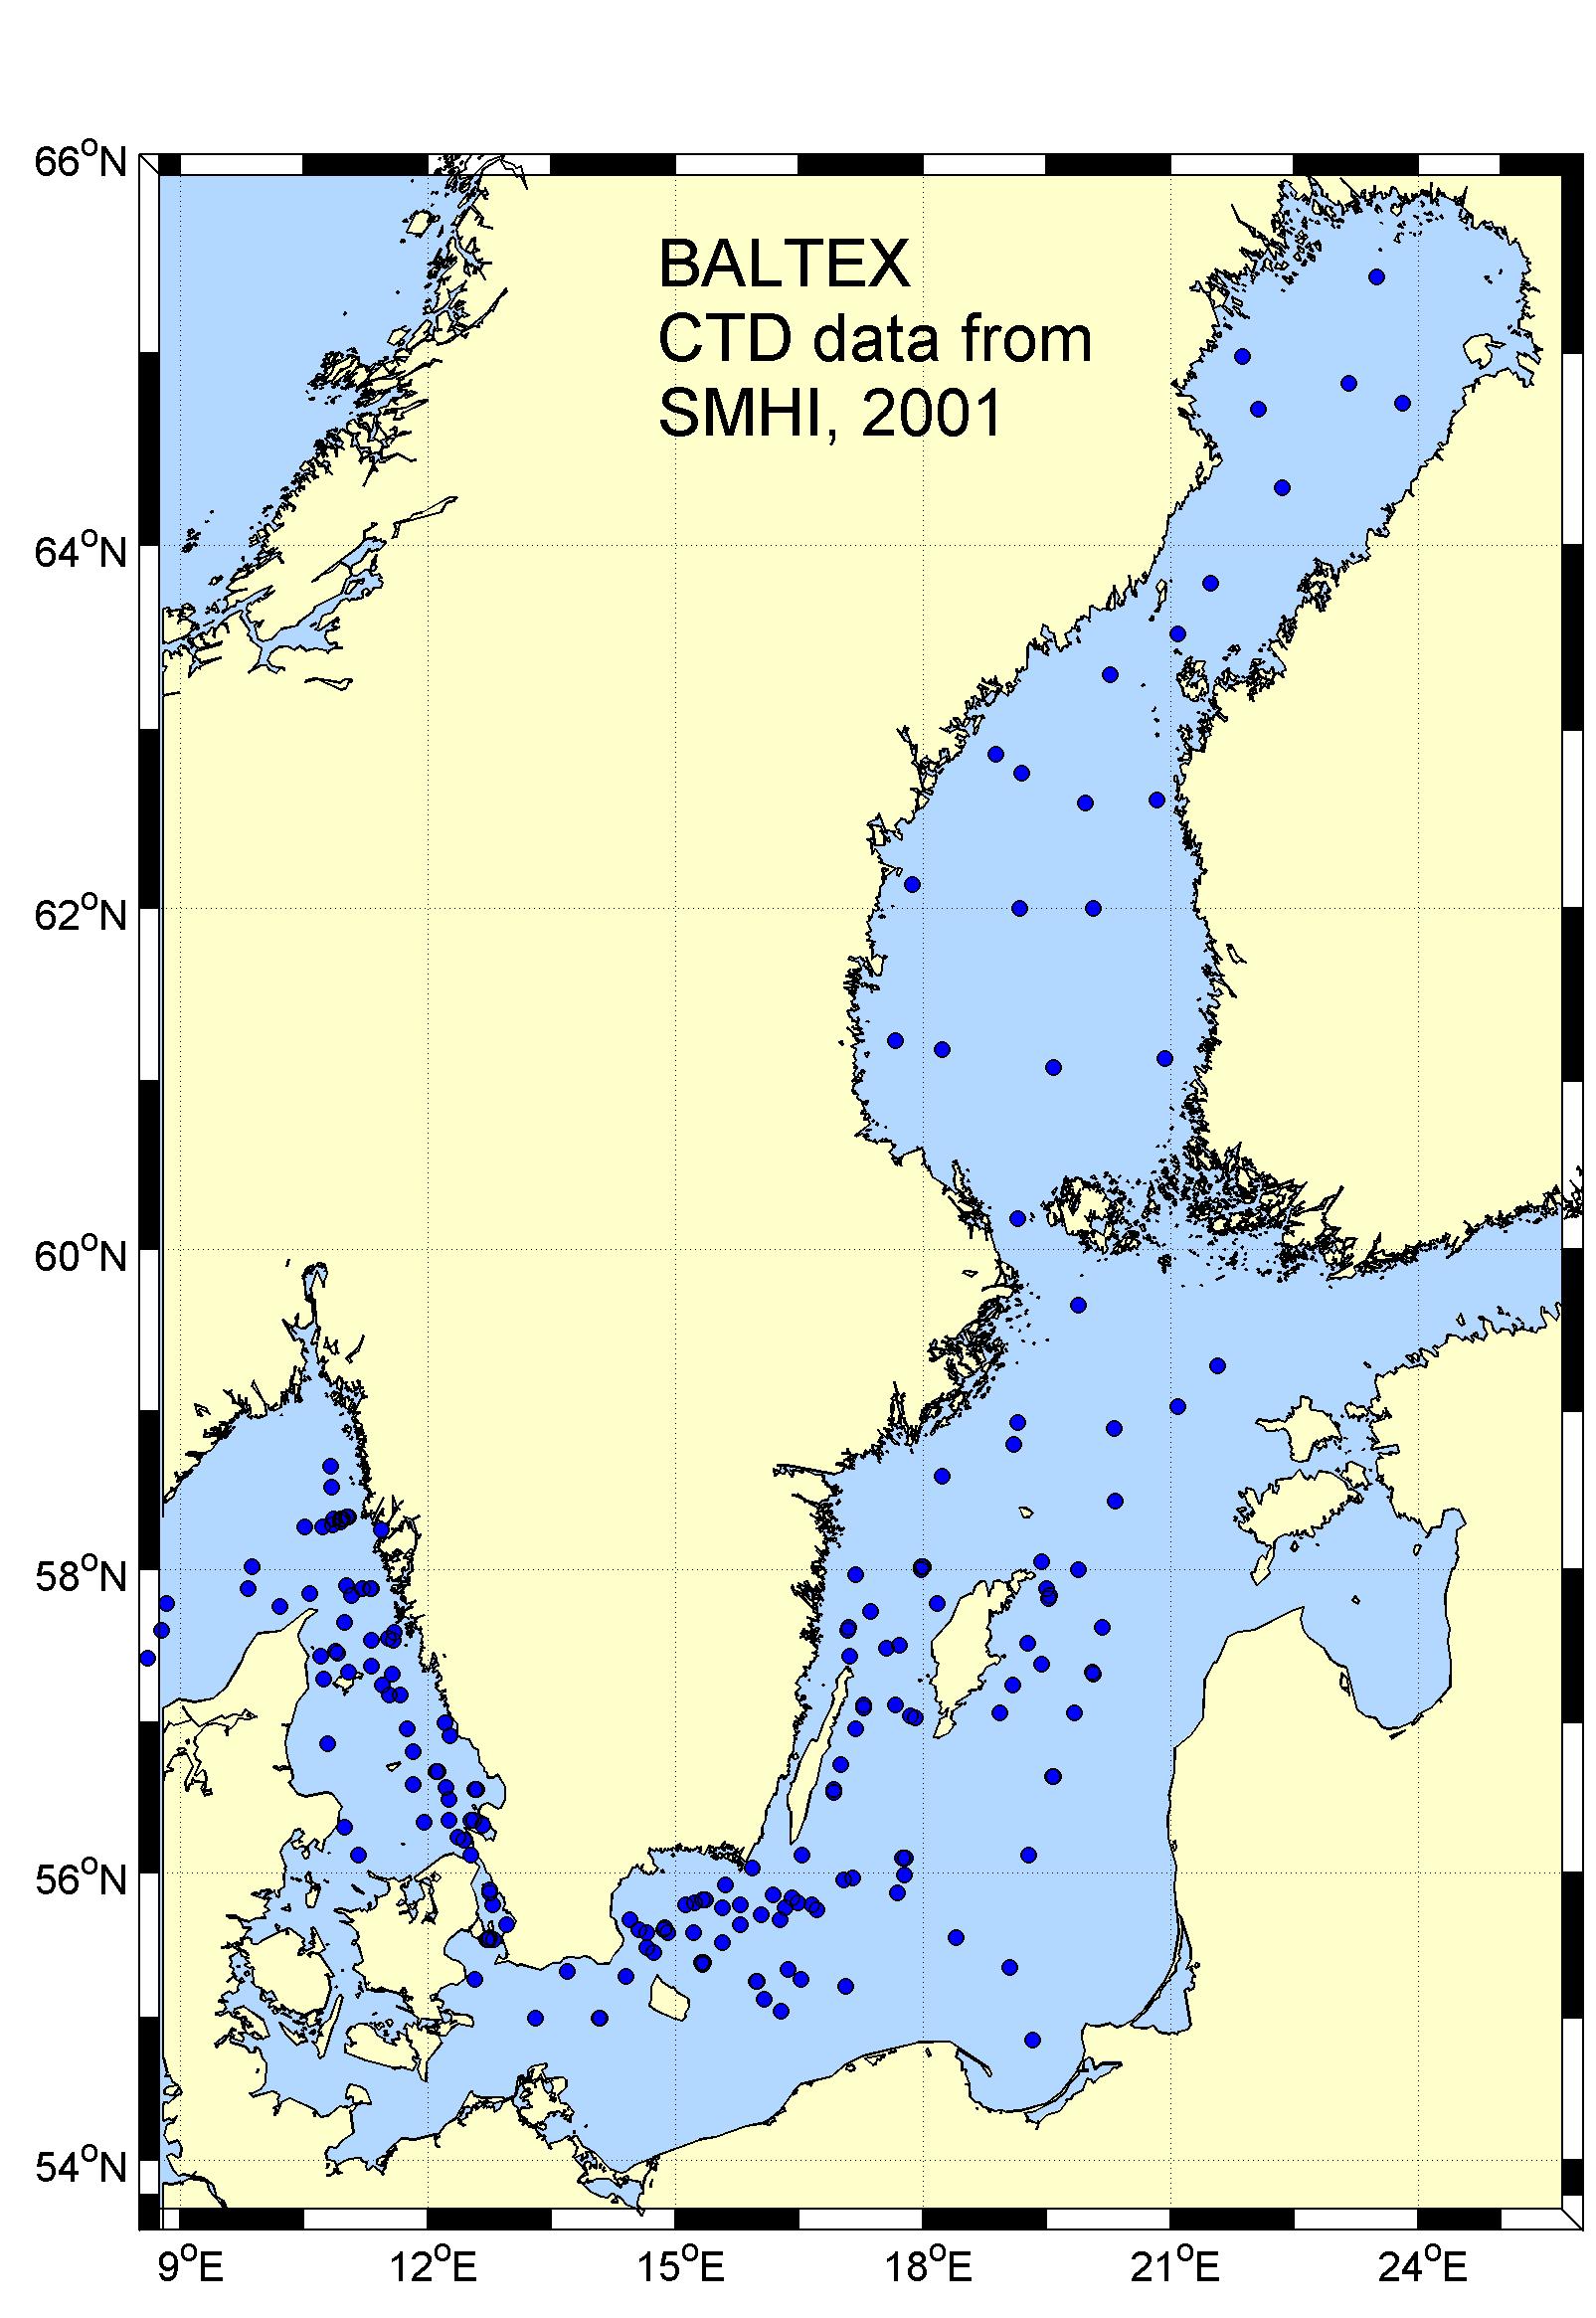 CTD cast data from SMHI, 2001